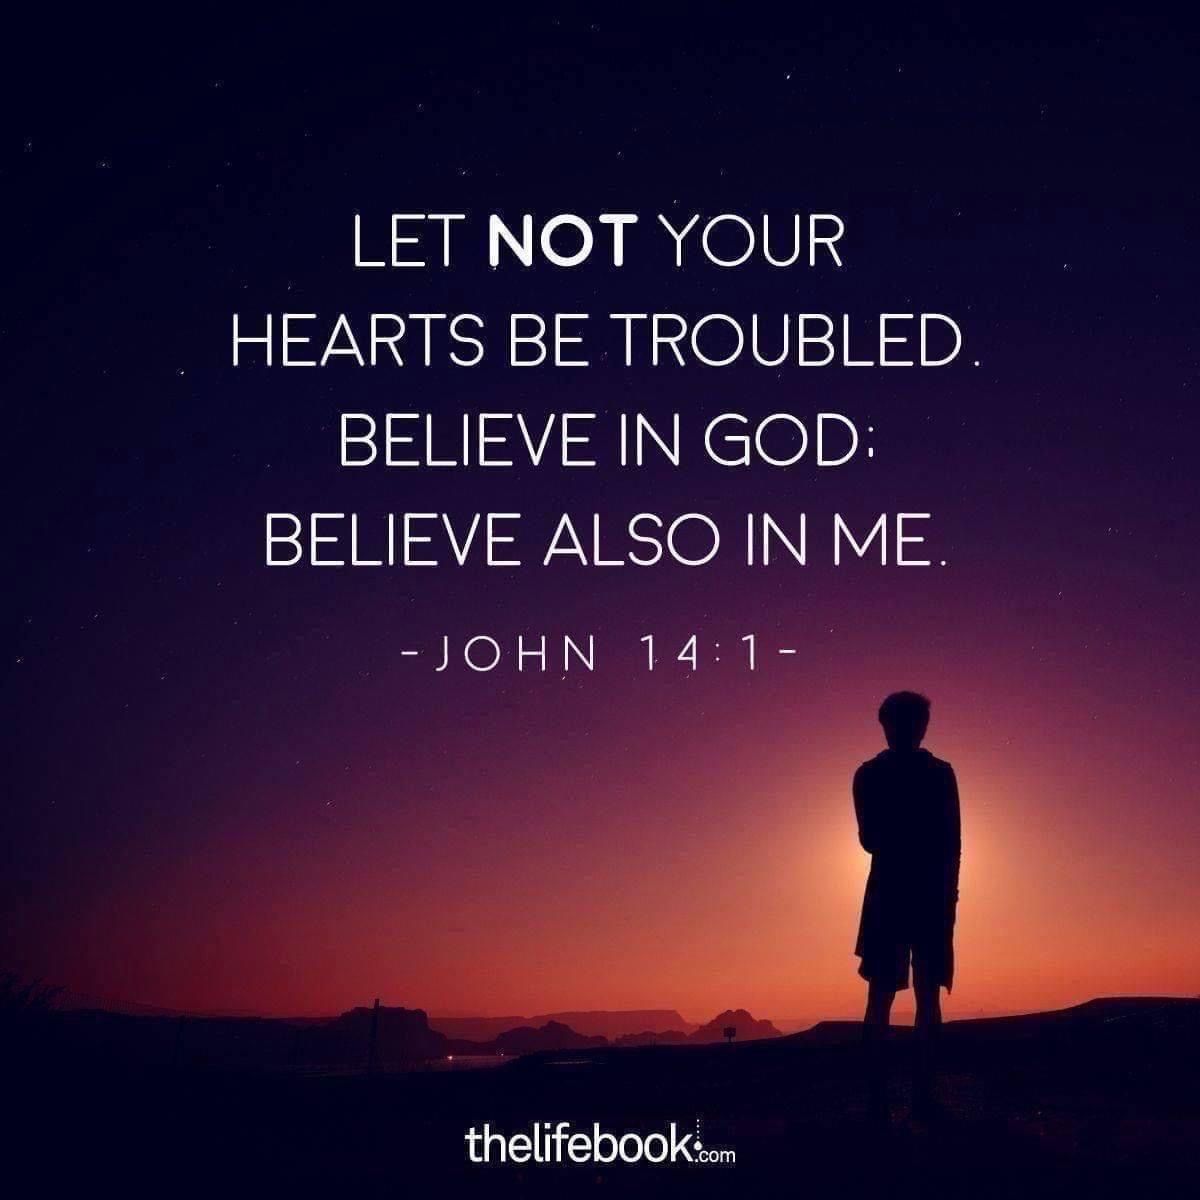 'LET NOT YOUR HEARTS BE TROUBLED BELIEVE IN BELEVEINGOD: GOD: BELIEVE ALSO IN ME -JOHN 14:1- thelifebook.com'